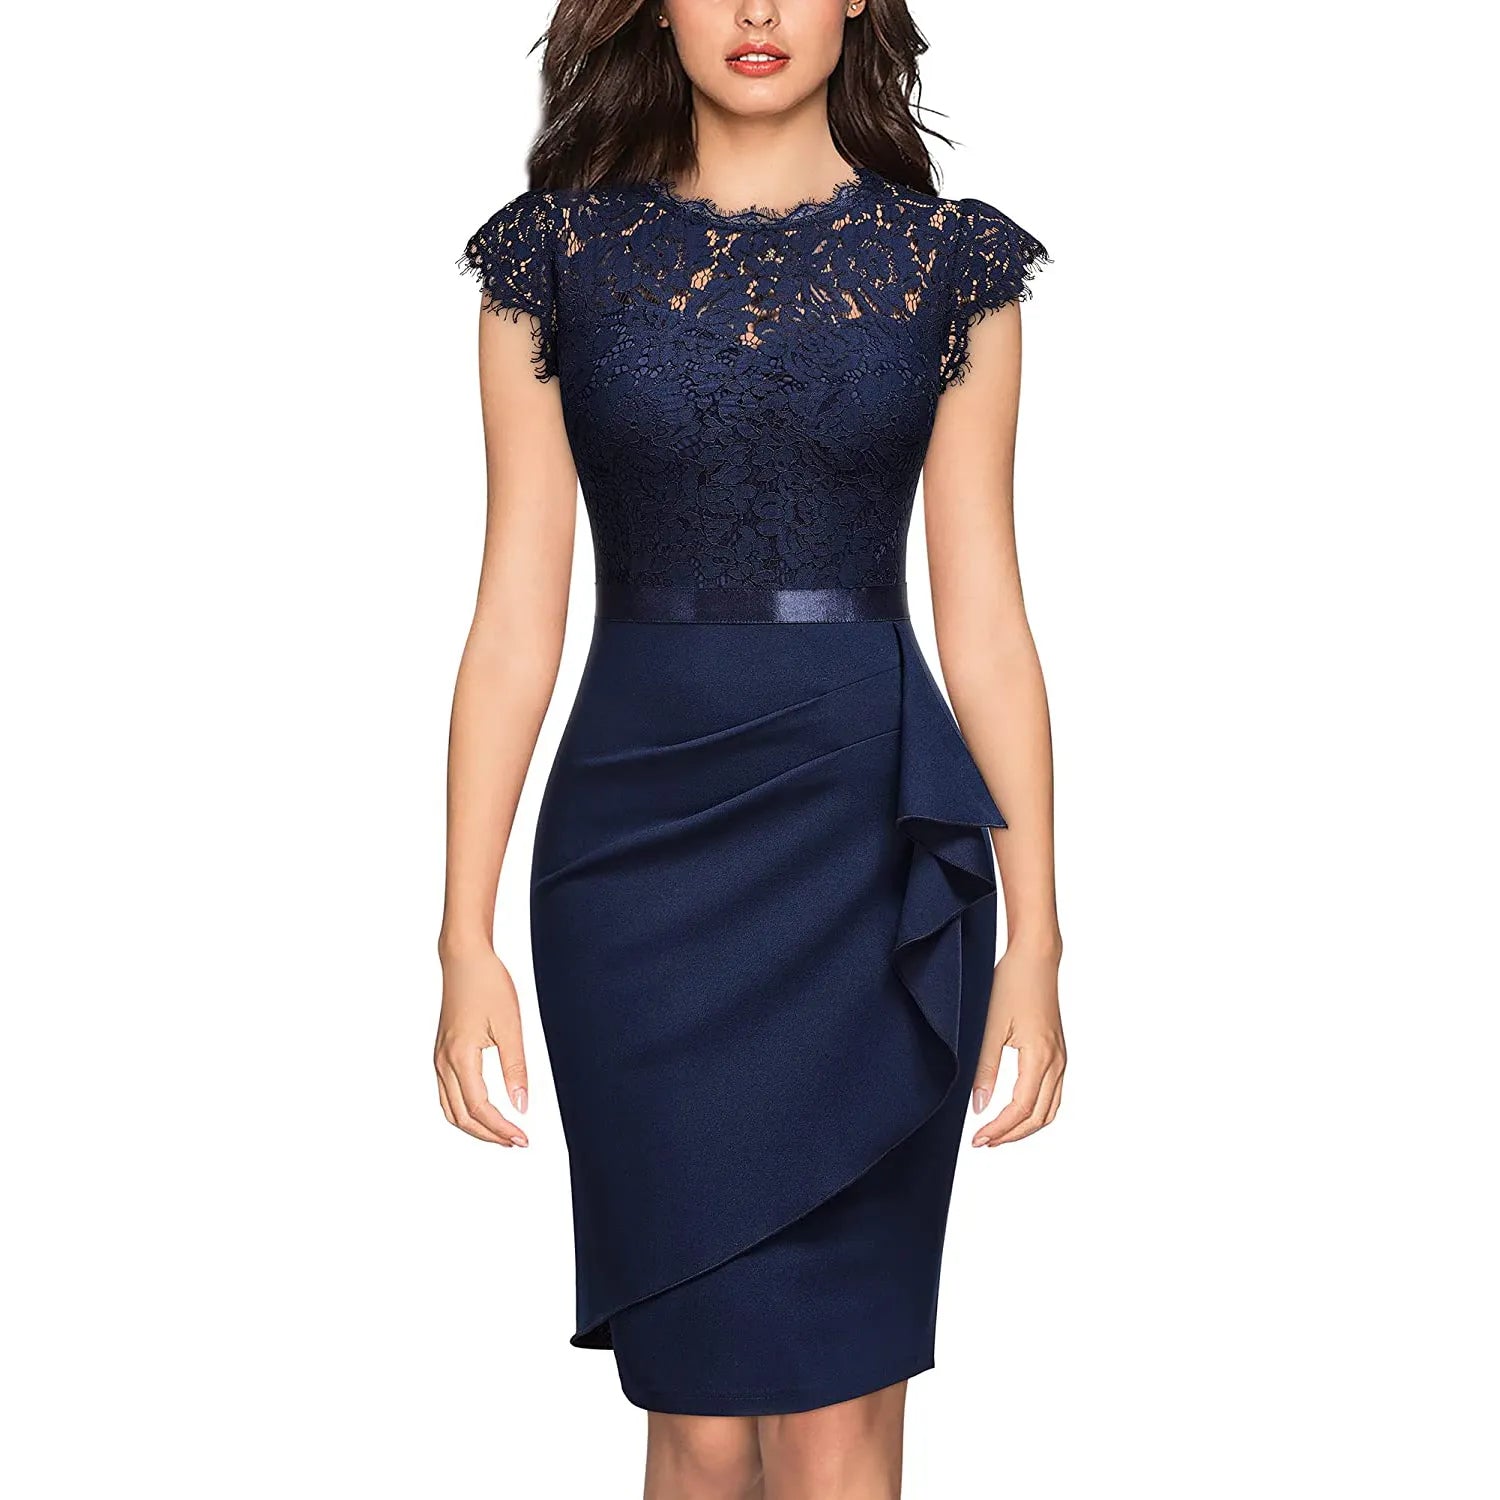 Elegant Floral Lace Ruffle Cap Sleeve Cocktail Party Knee Length Dress